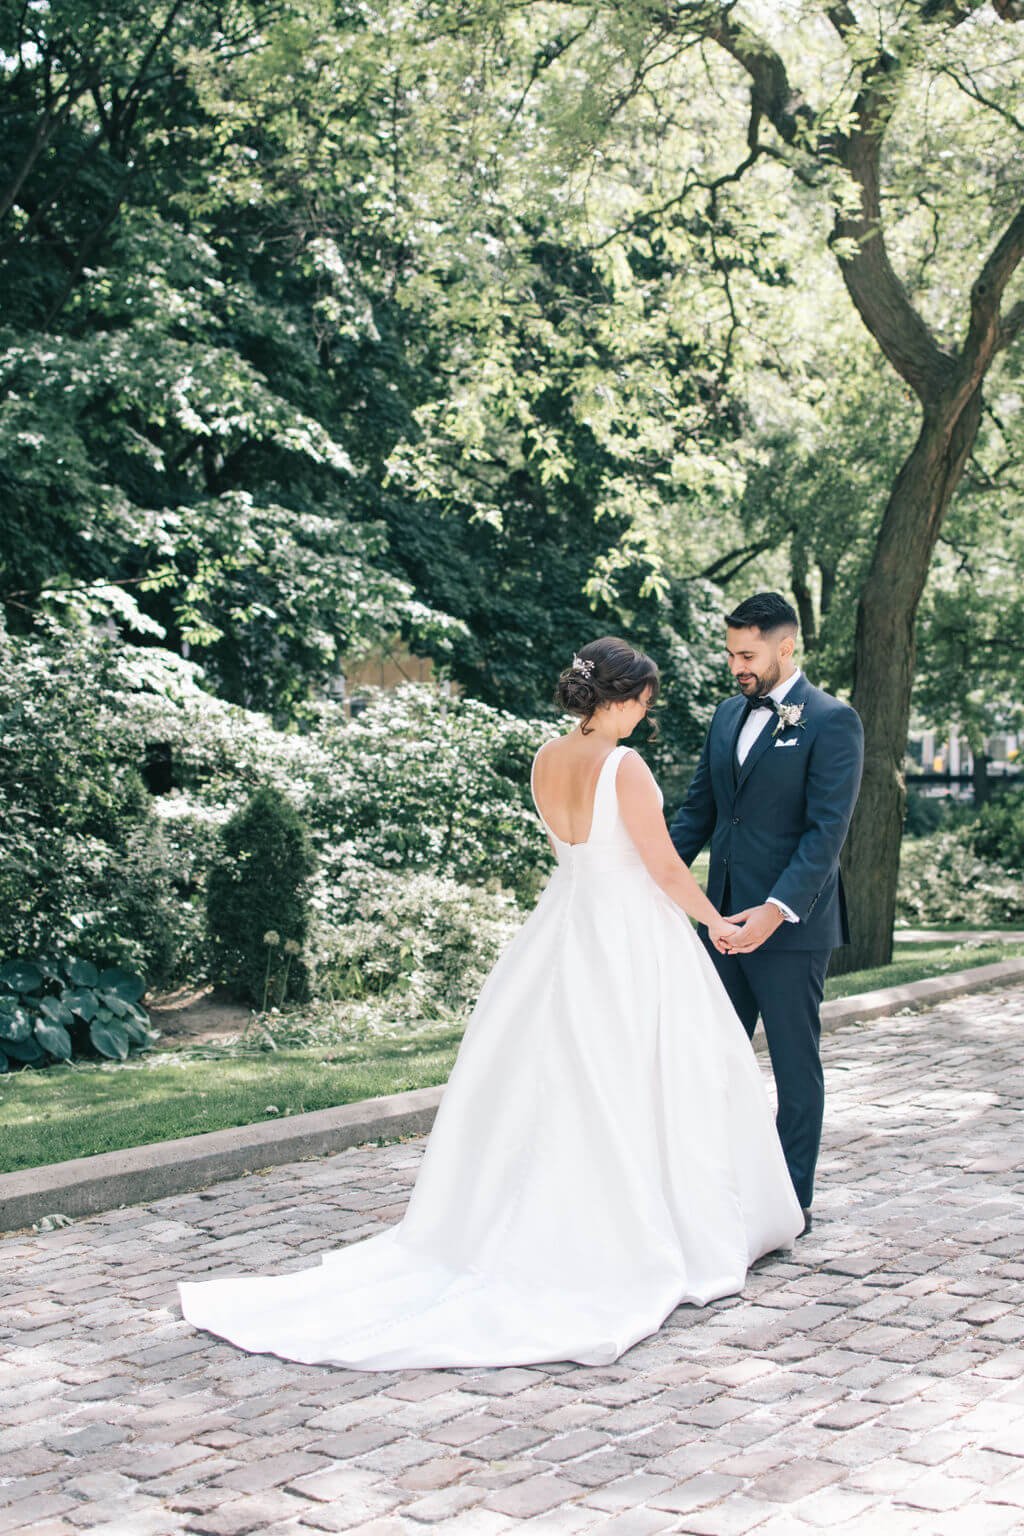 Timeless Toronto wedding photography by Toronto wedding photographers, Ugo Photography